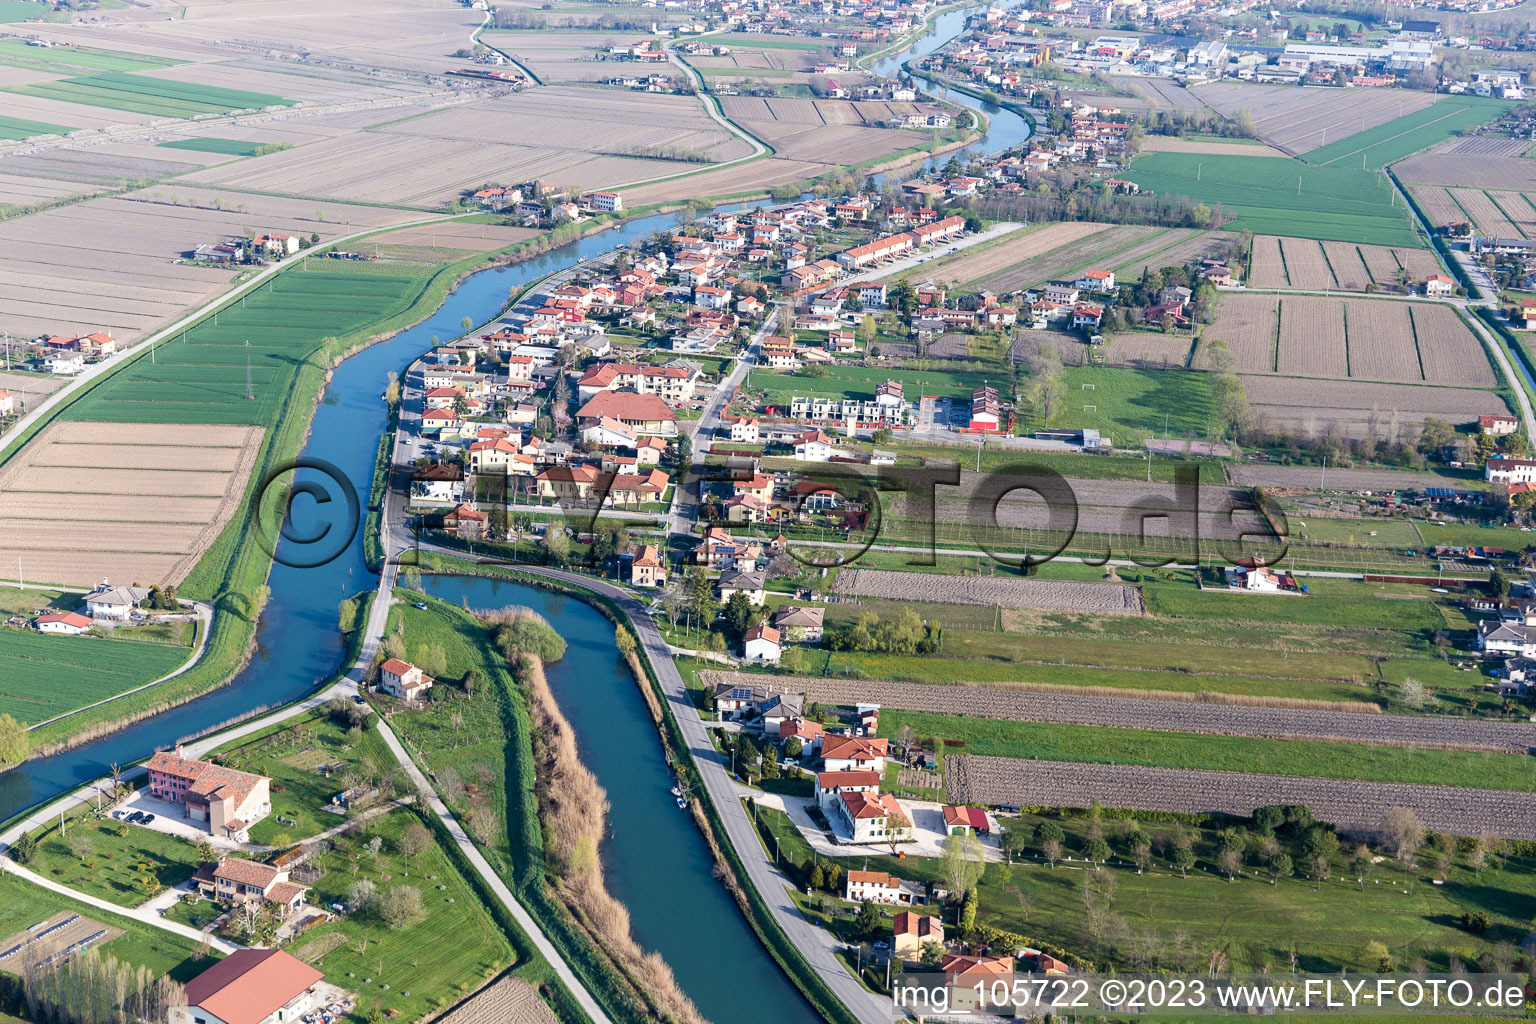 Aerial photograpy of Cavanella in the state Veneto, Italy